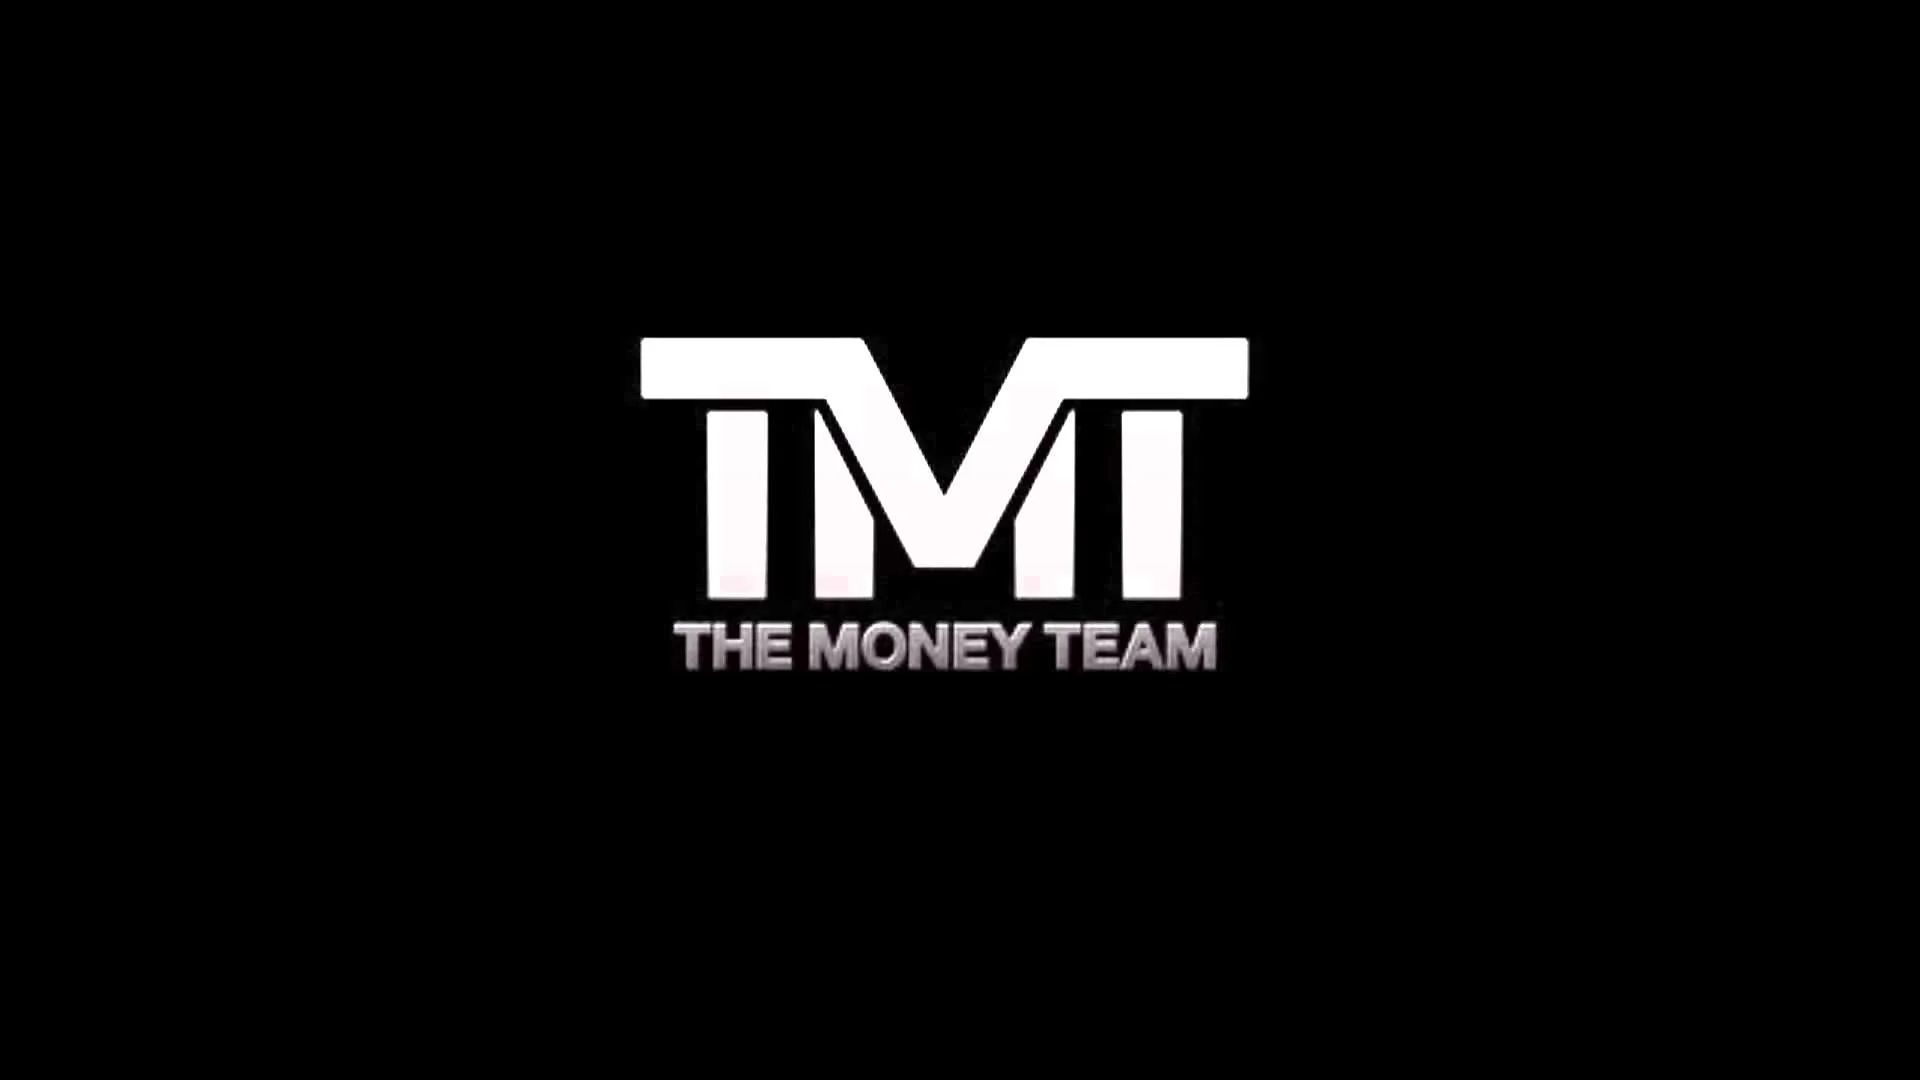 Displaying 16 Images For – The Money Team Wallpaper Hd.